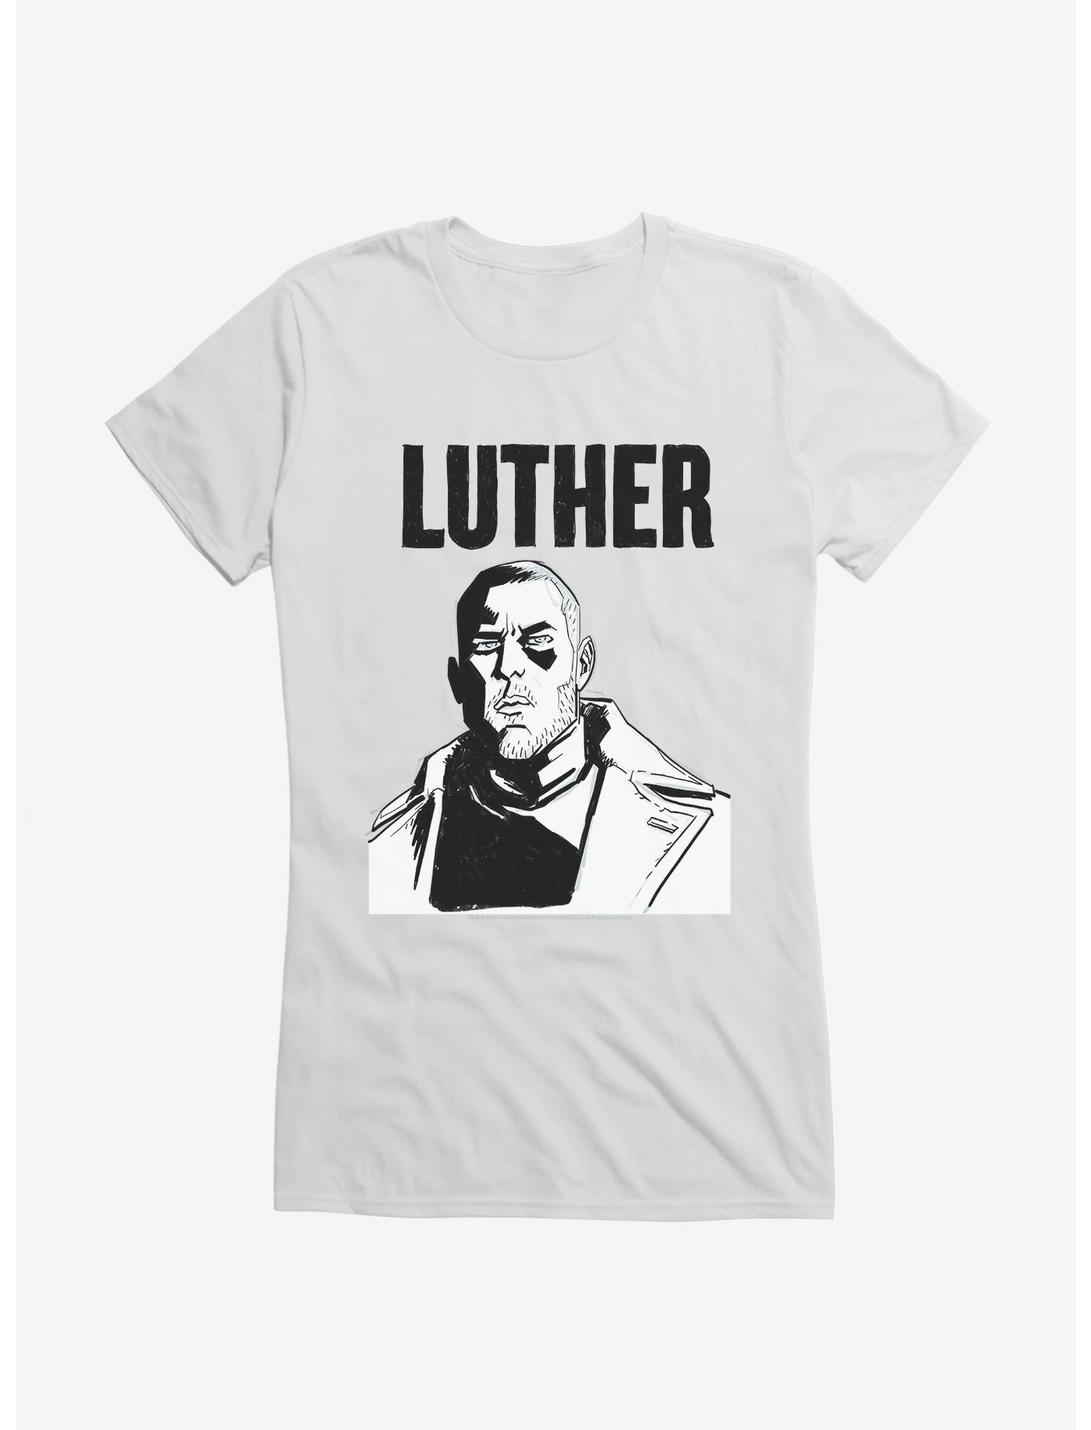 The Umbrella Academy Monochrome Luther Girls T-Shirt, WHITE, hi-res